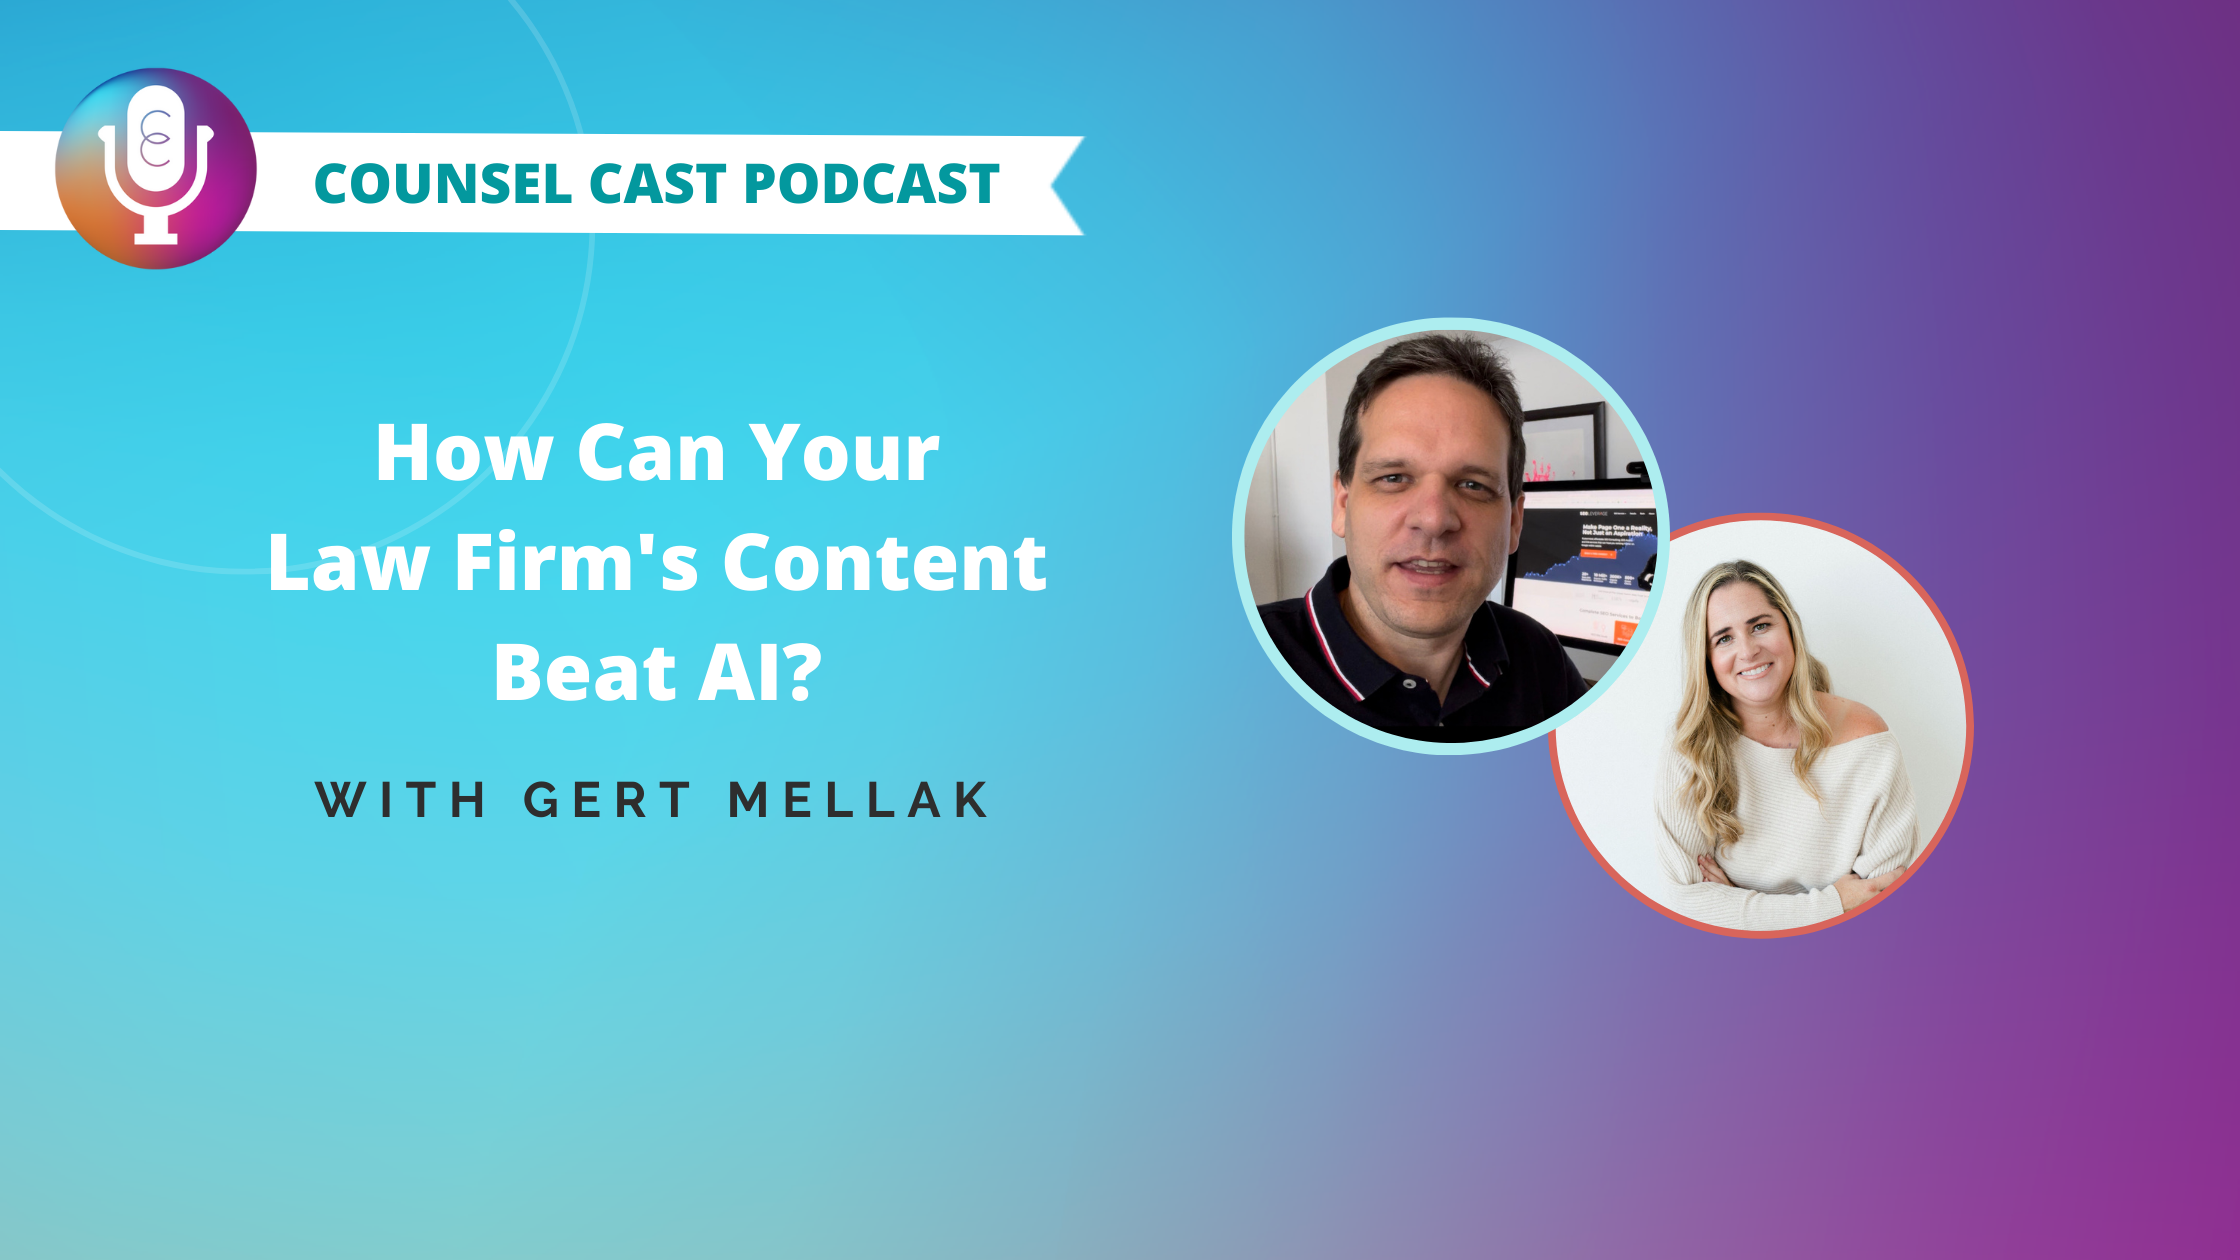 How Can Your Law Firm's Content Beat AI? with Gert Mellak